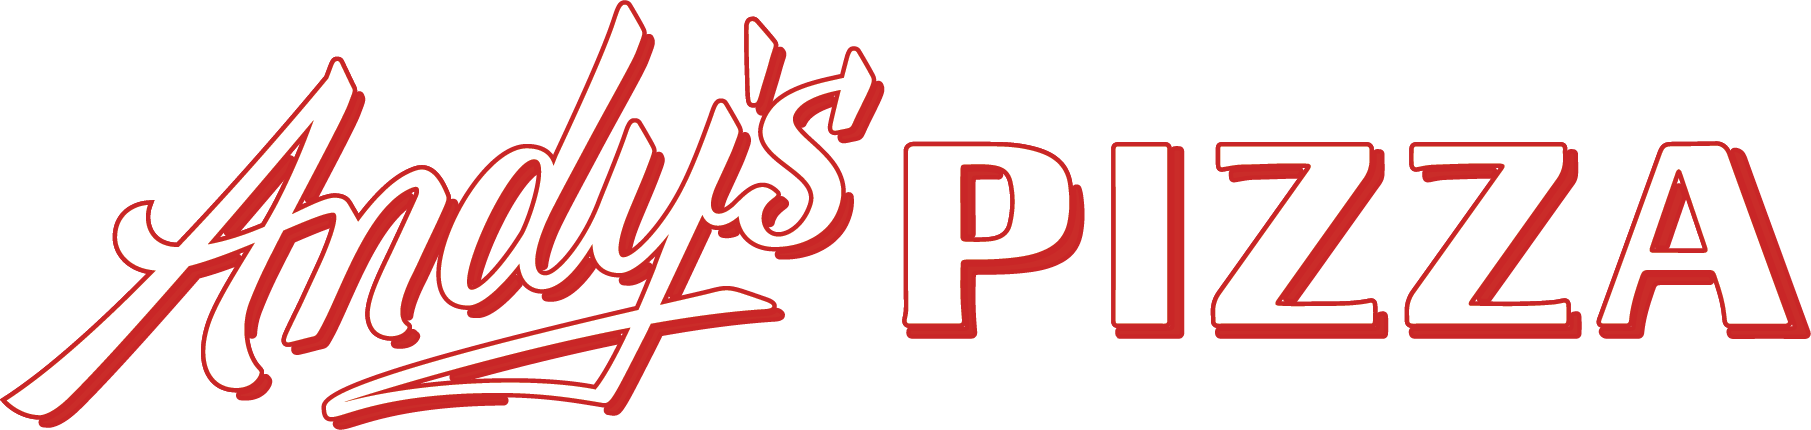 Eat Andys Pizza LLC Home